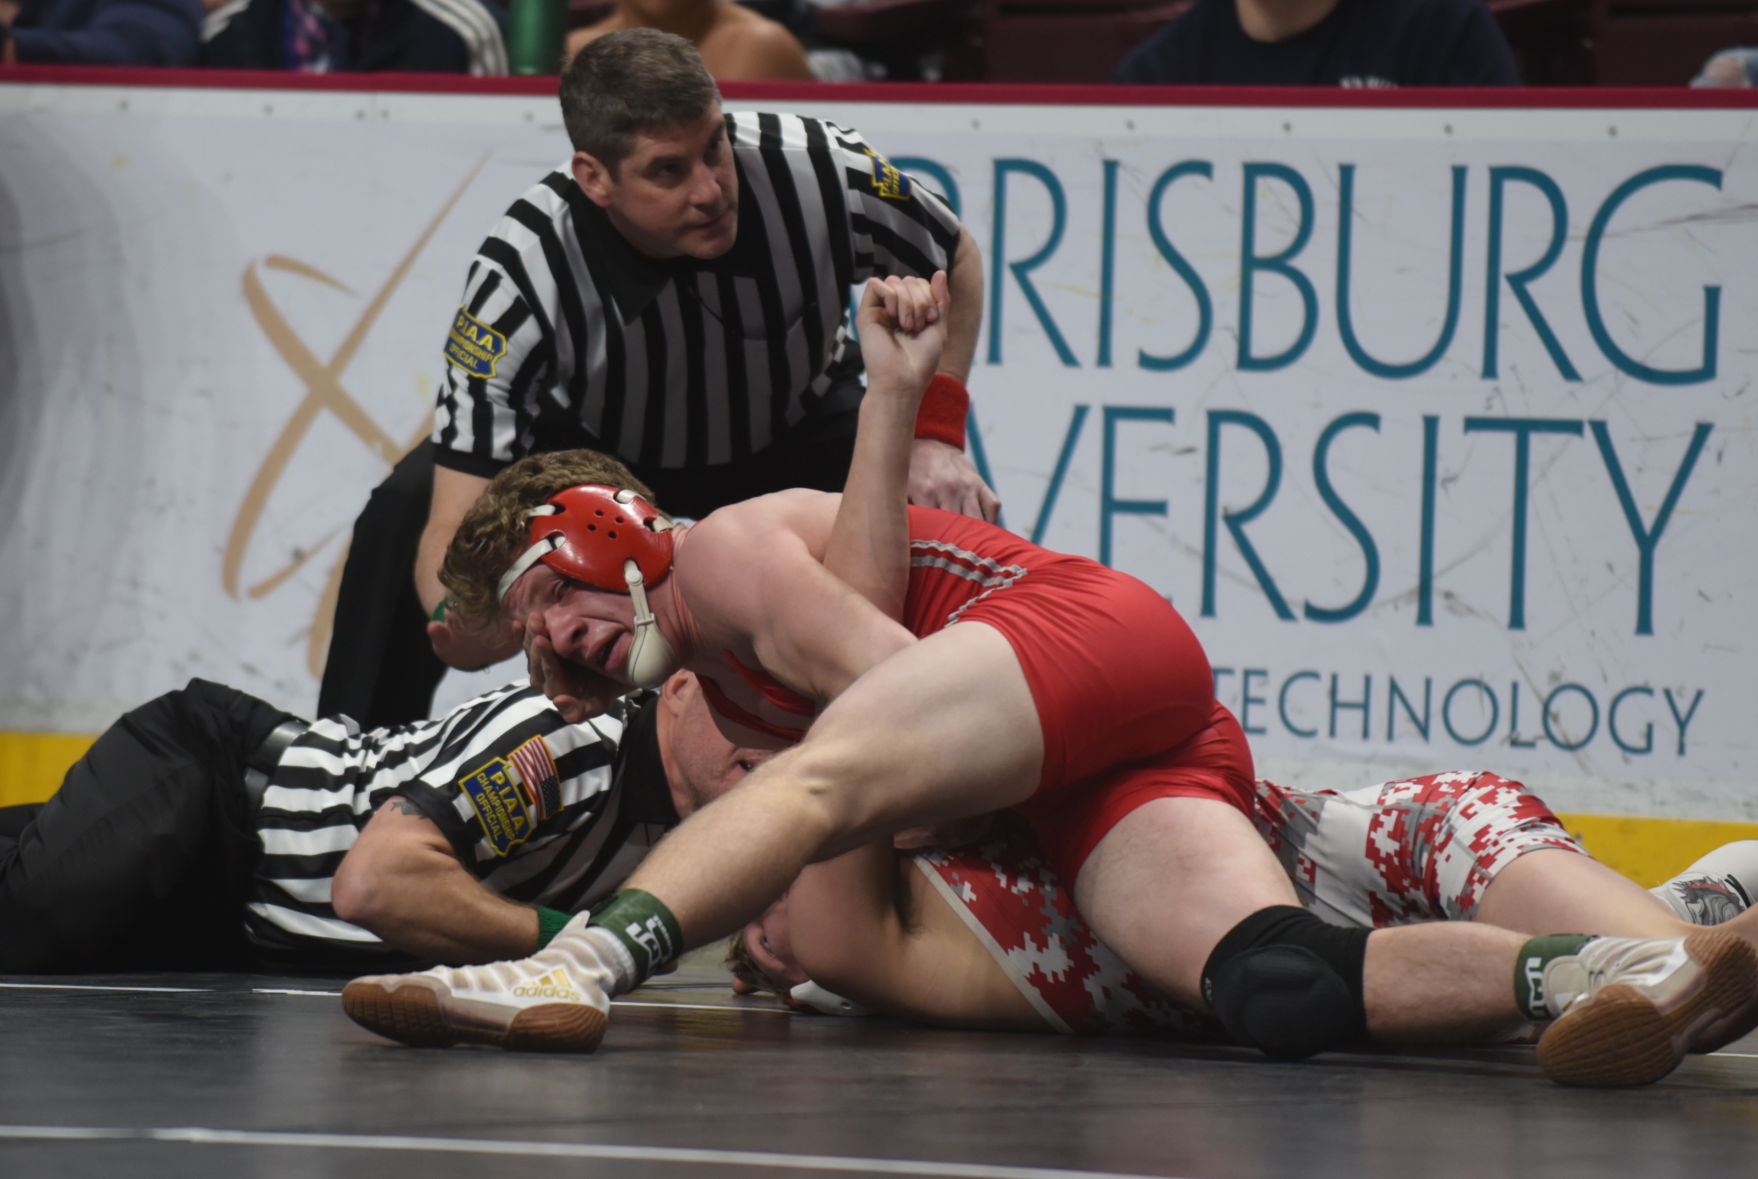 Ferndales Korenoski commits to wrestle at Garrett College; collected 111 wins competing in co-op at Westmont Hilltop Sports tribdem pic